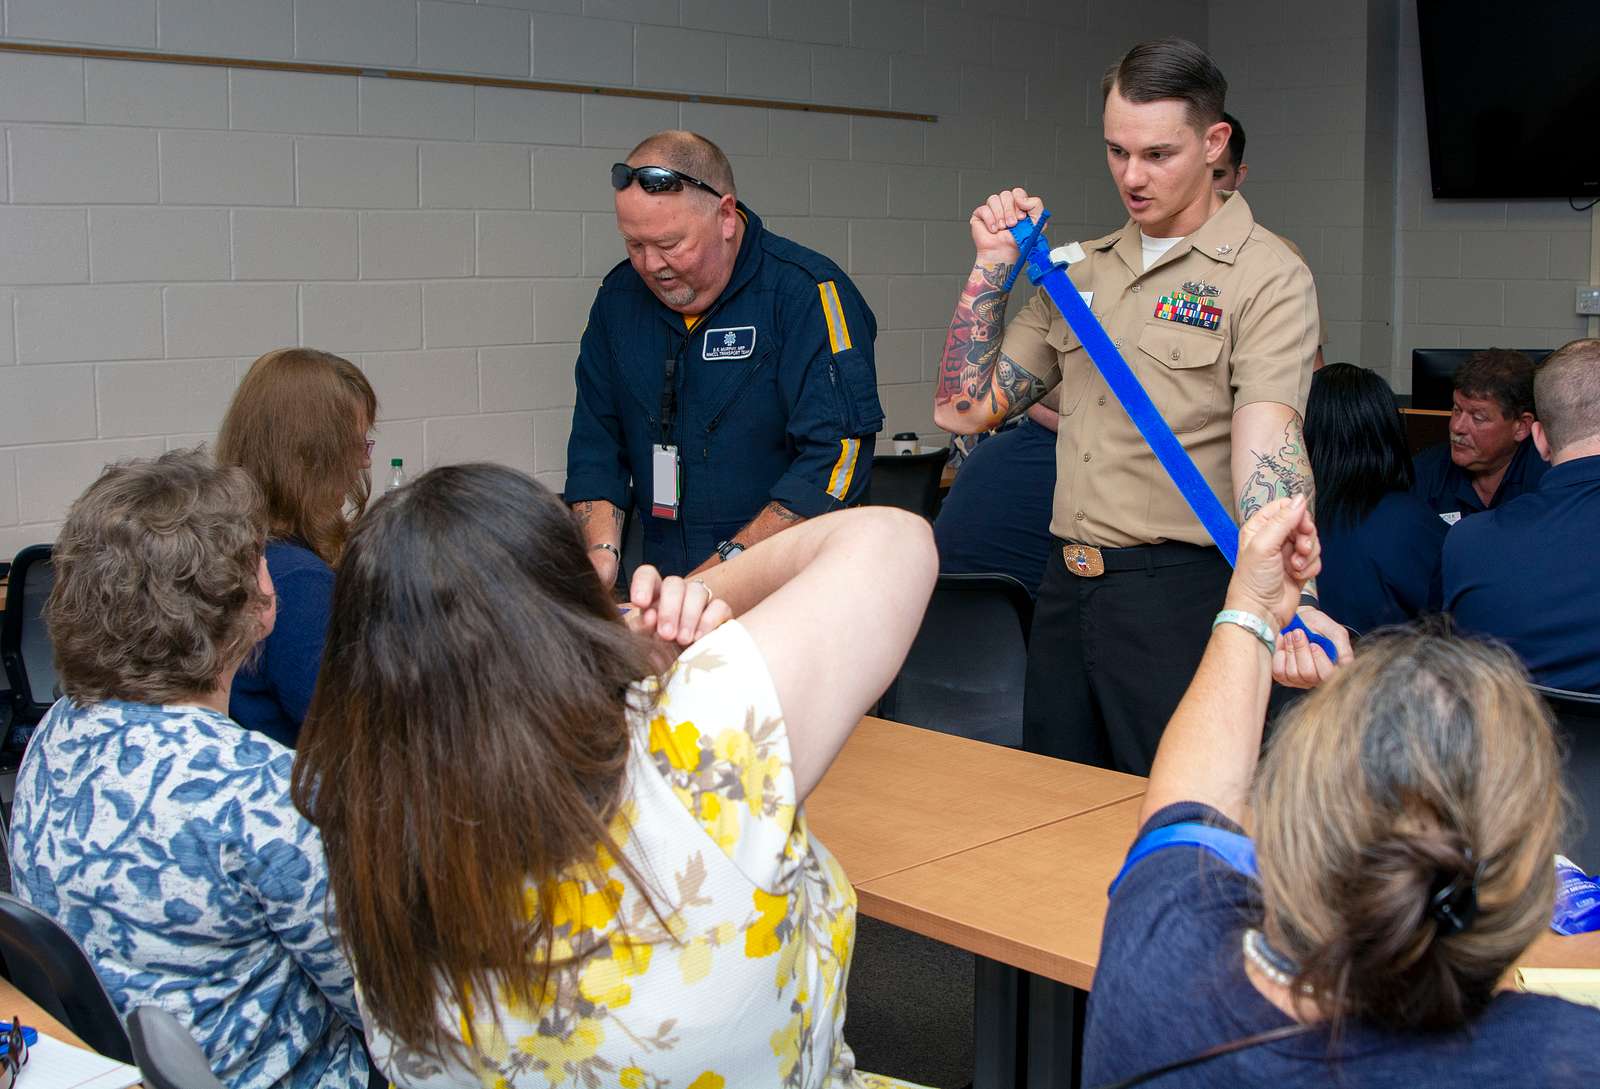 Col. Thomas Brittain, left, cuts the ribbon with a sword with help from  Command Sgt. Major Matthew Barnes, center, and Specialist Stafford Smith  during the Ribbon Cutting Ceremony at the remodel Lewis